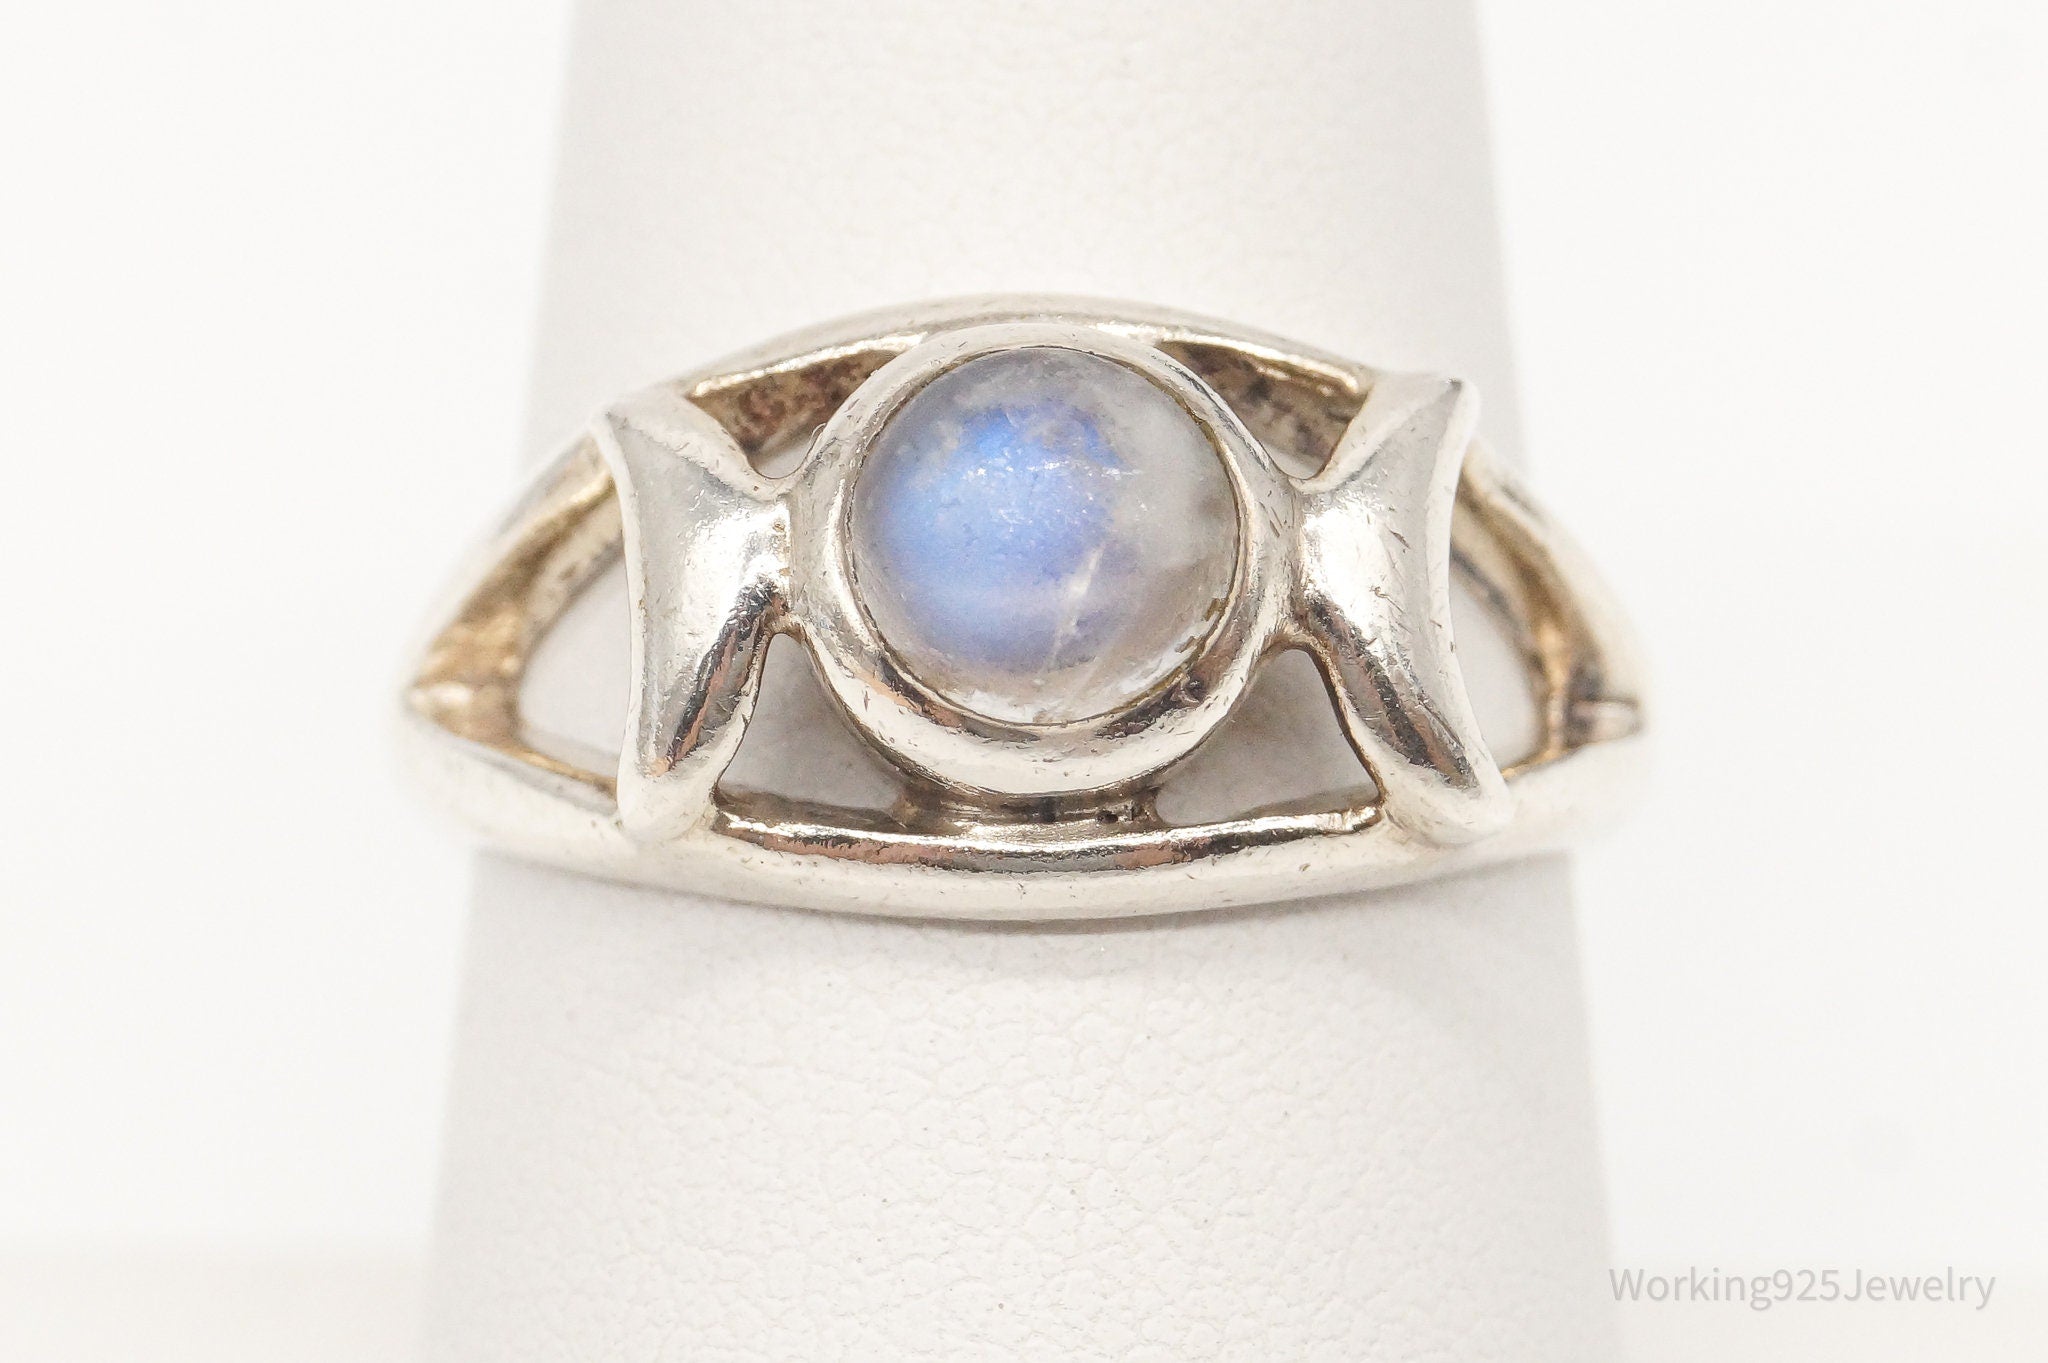 Vintage Triple Moon Moonstone Sterling Silver Ring - Size 7.5